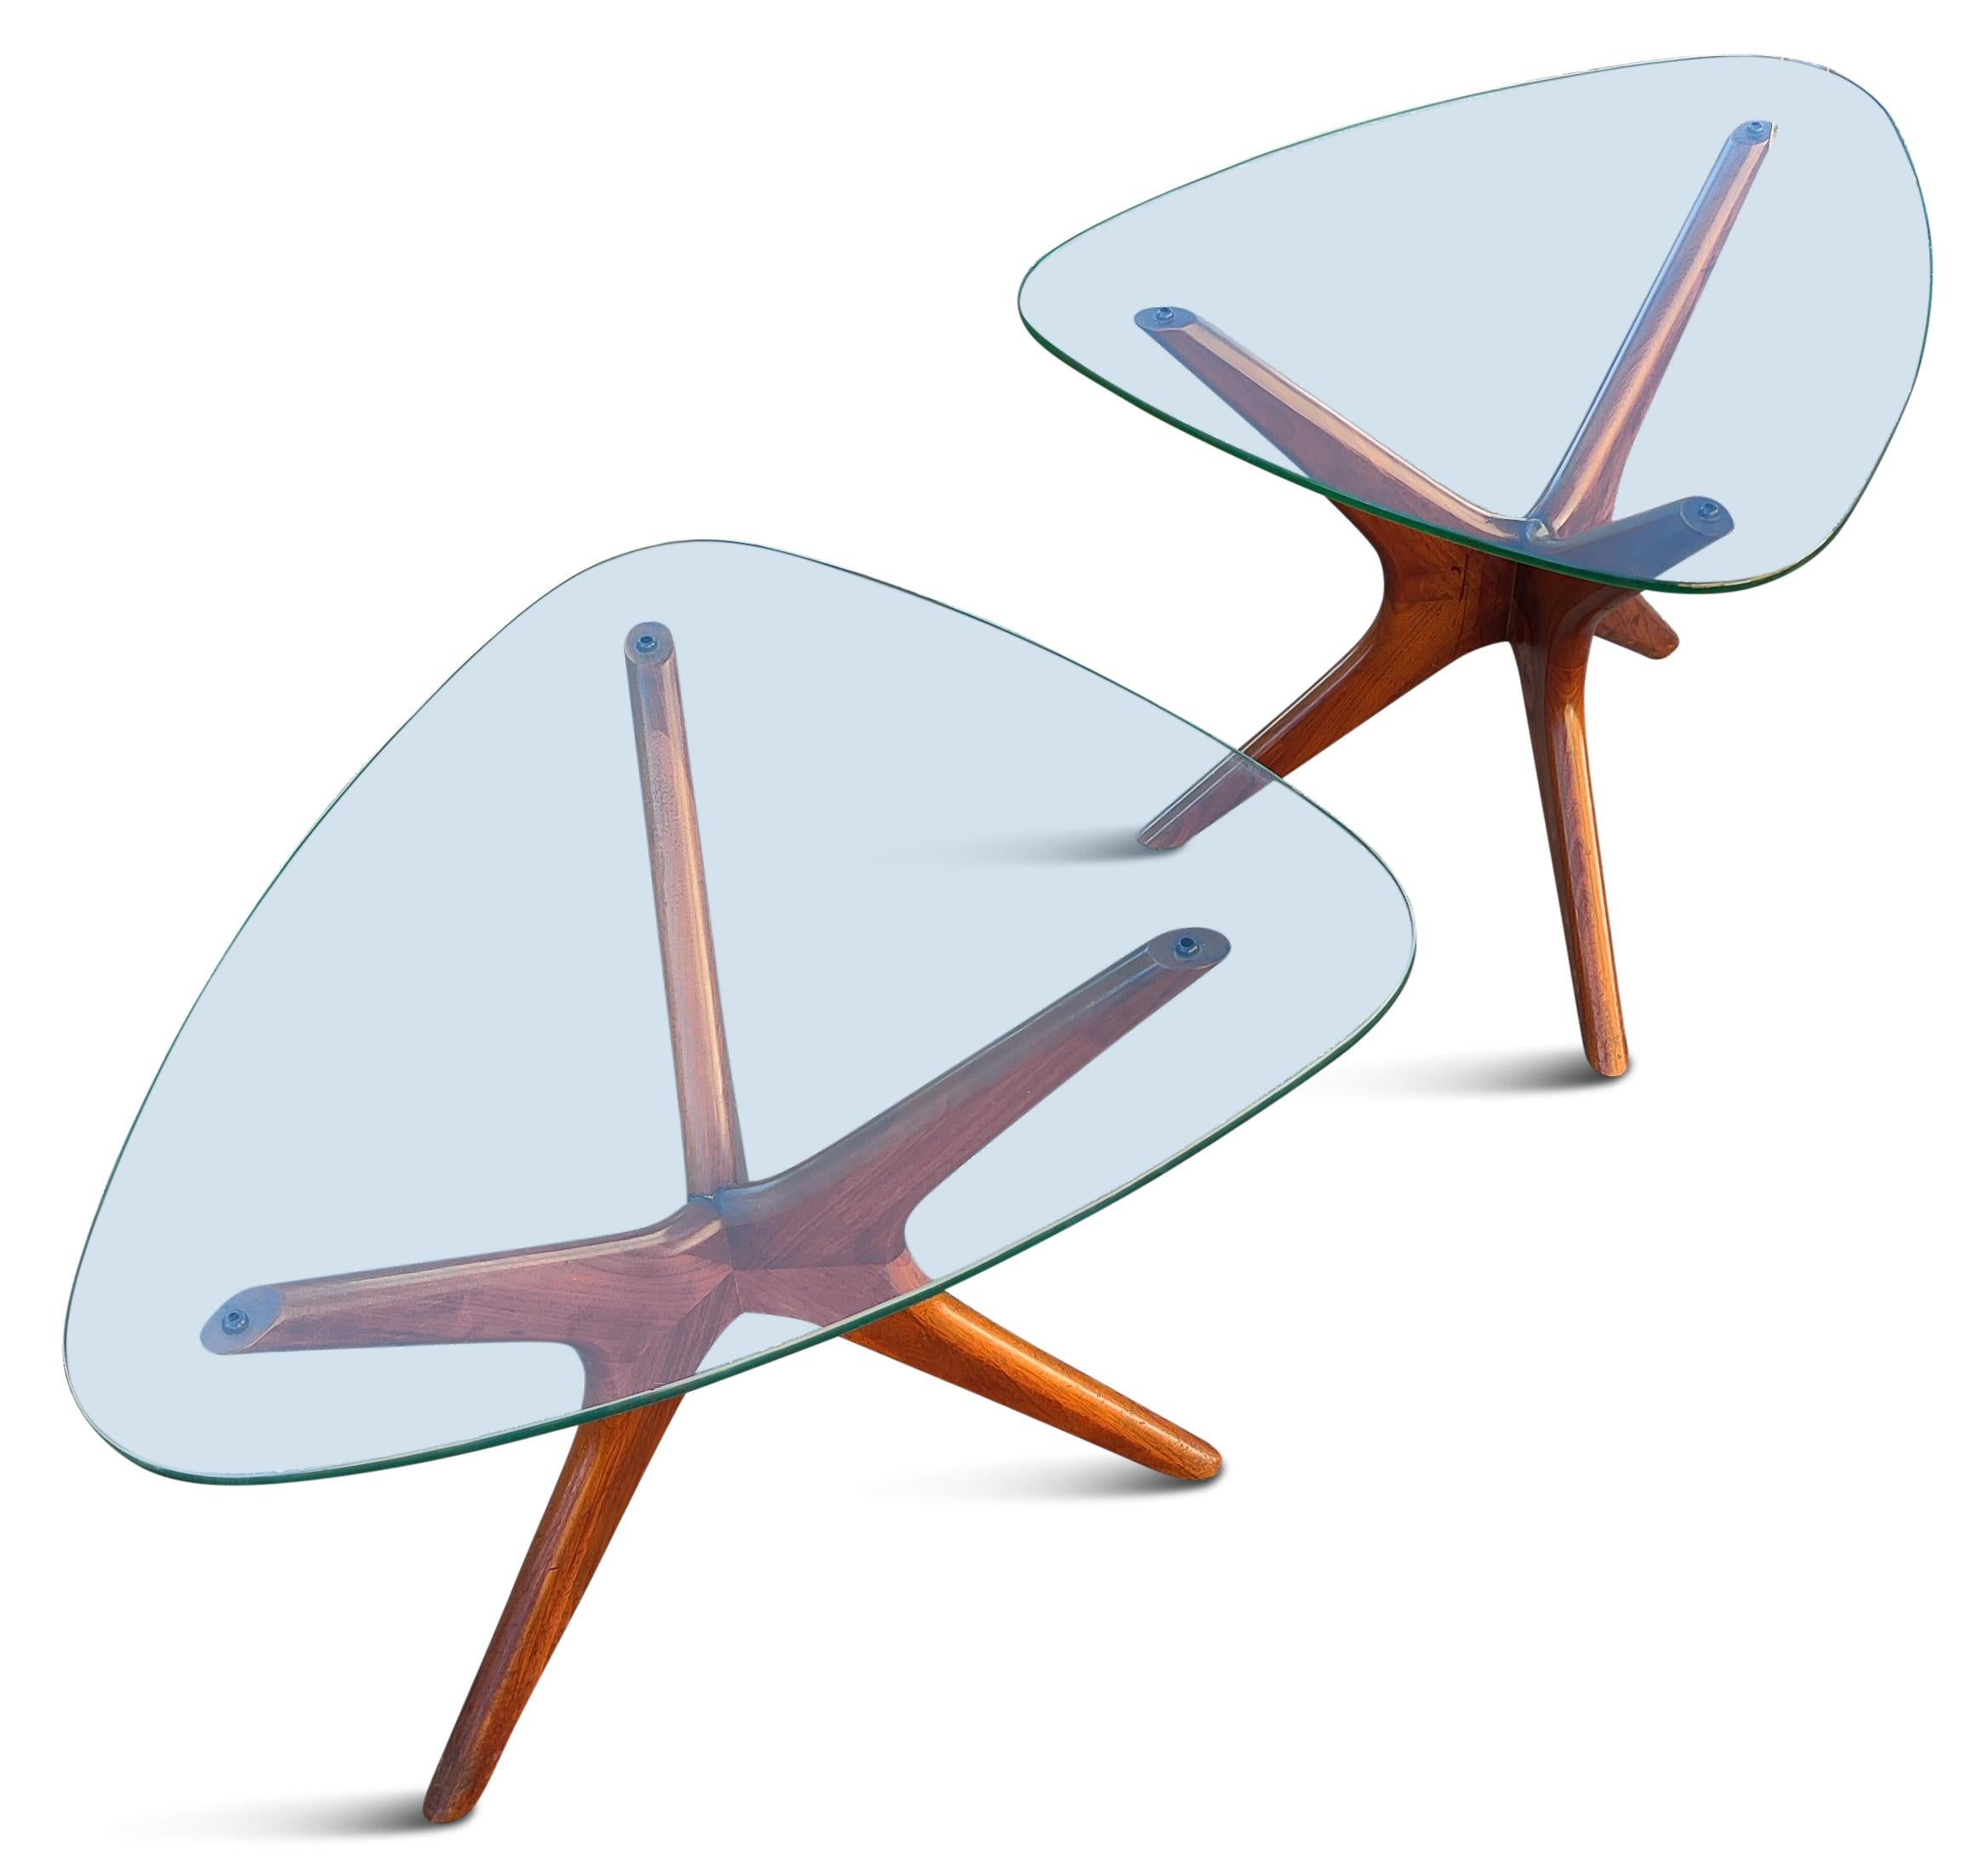 Designed by Adrain Pearsall and built by his company, Craft Associates, in the 1960s, these are classic Mid-Century Modern side or end tables. Often called the Jacks/Jax tables, due to the evocative sculpted walnut bases. The also resemble